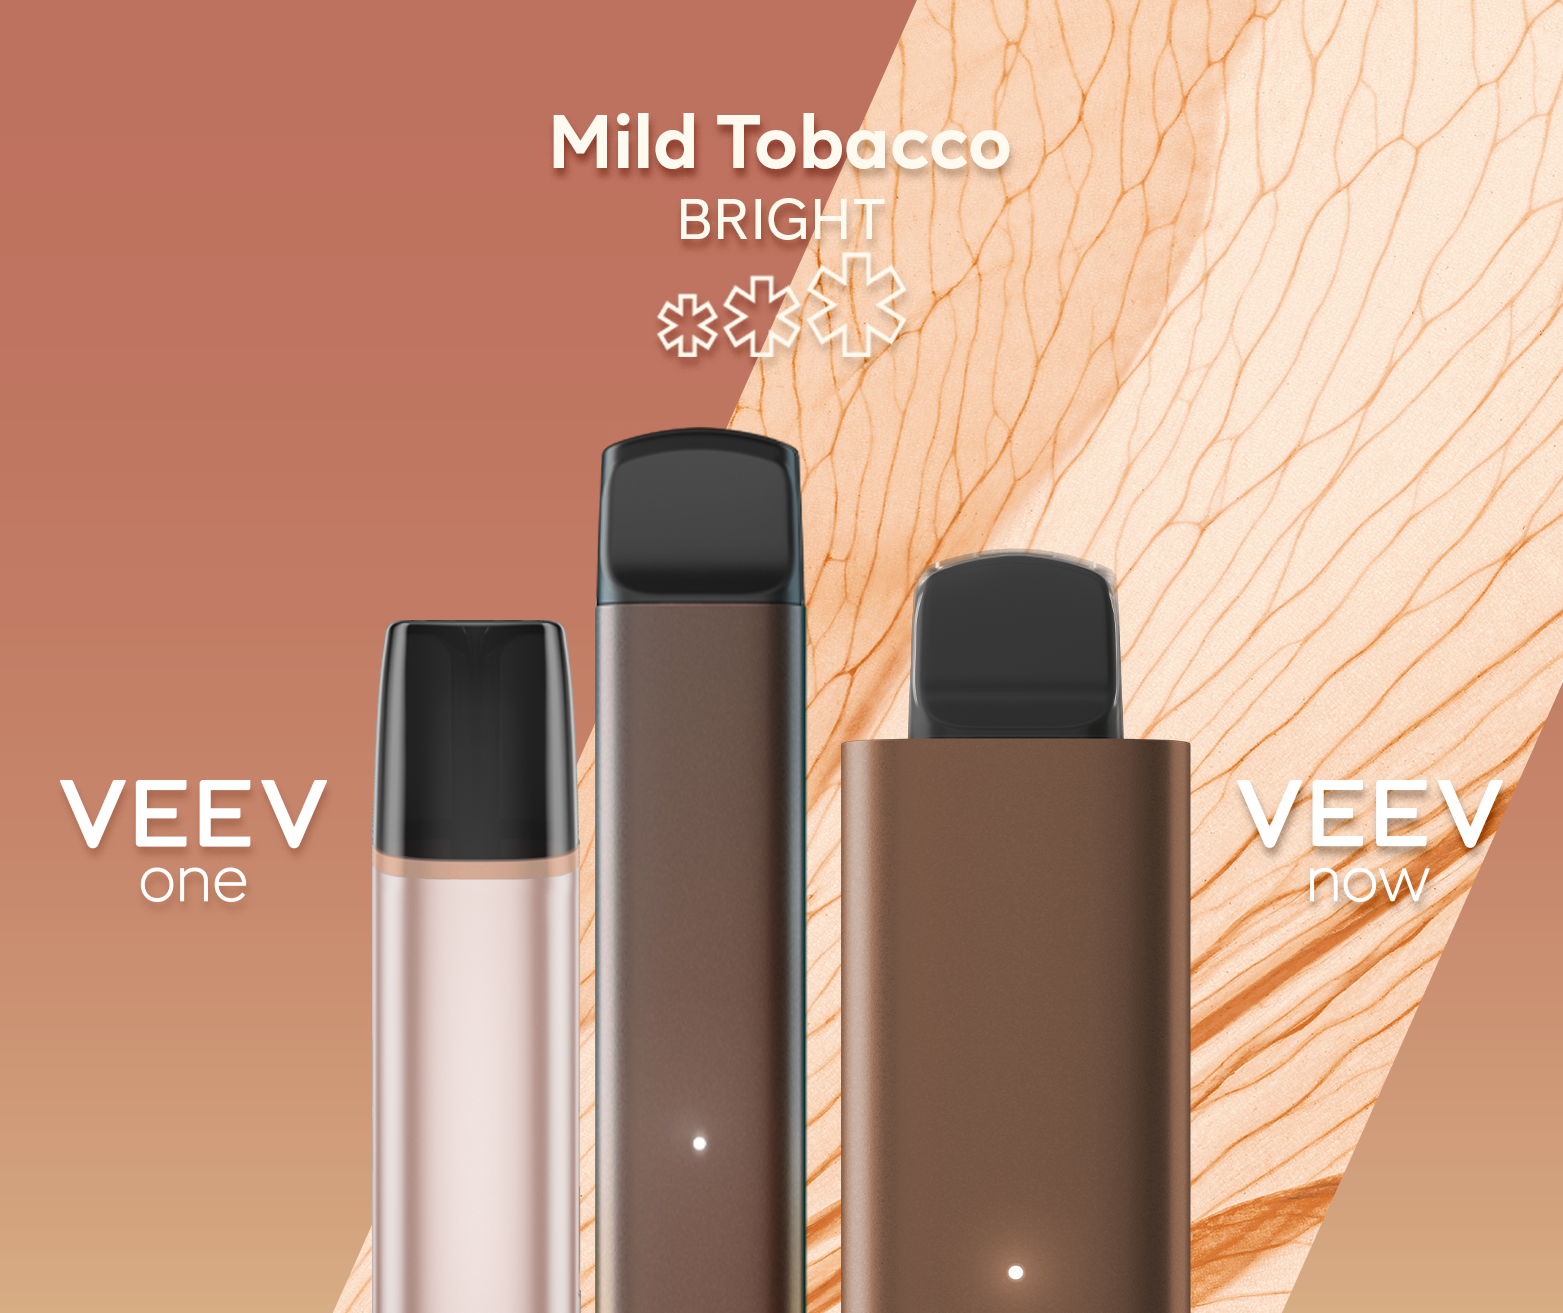 A VEEV ONE pod device and VEEV NOW disposable, both in Mild Tobacco flavour.